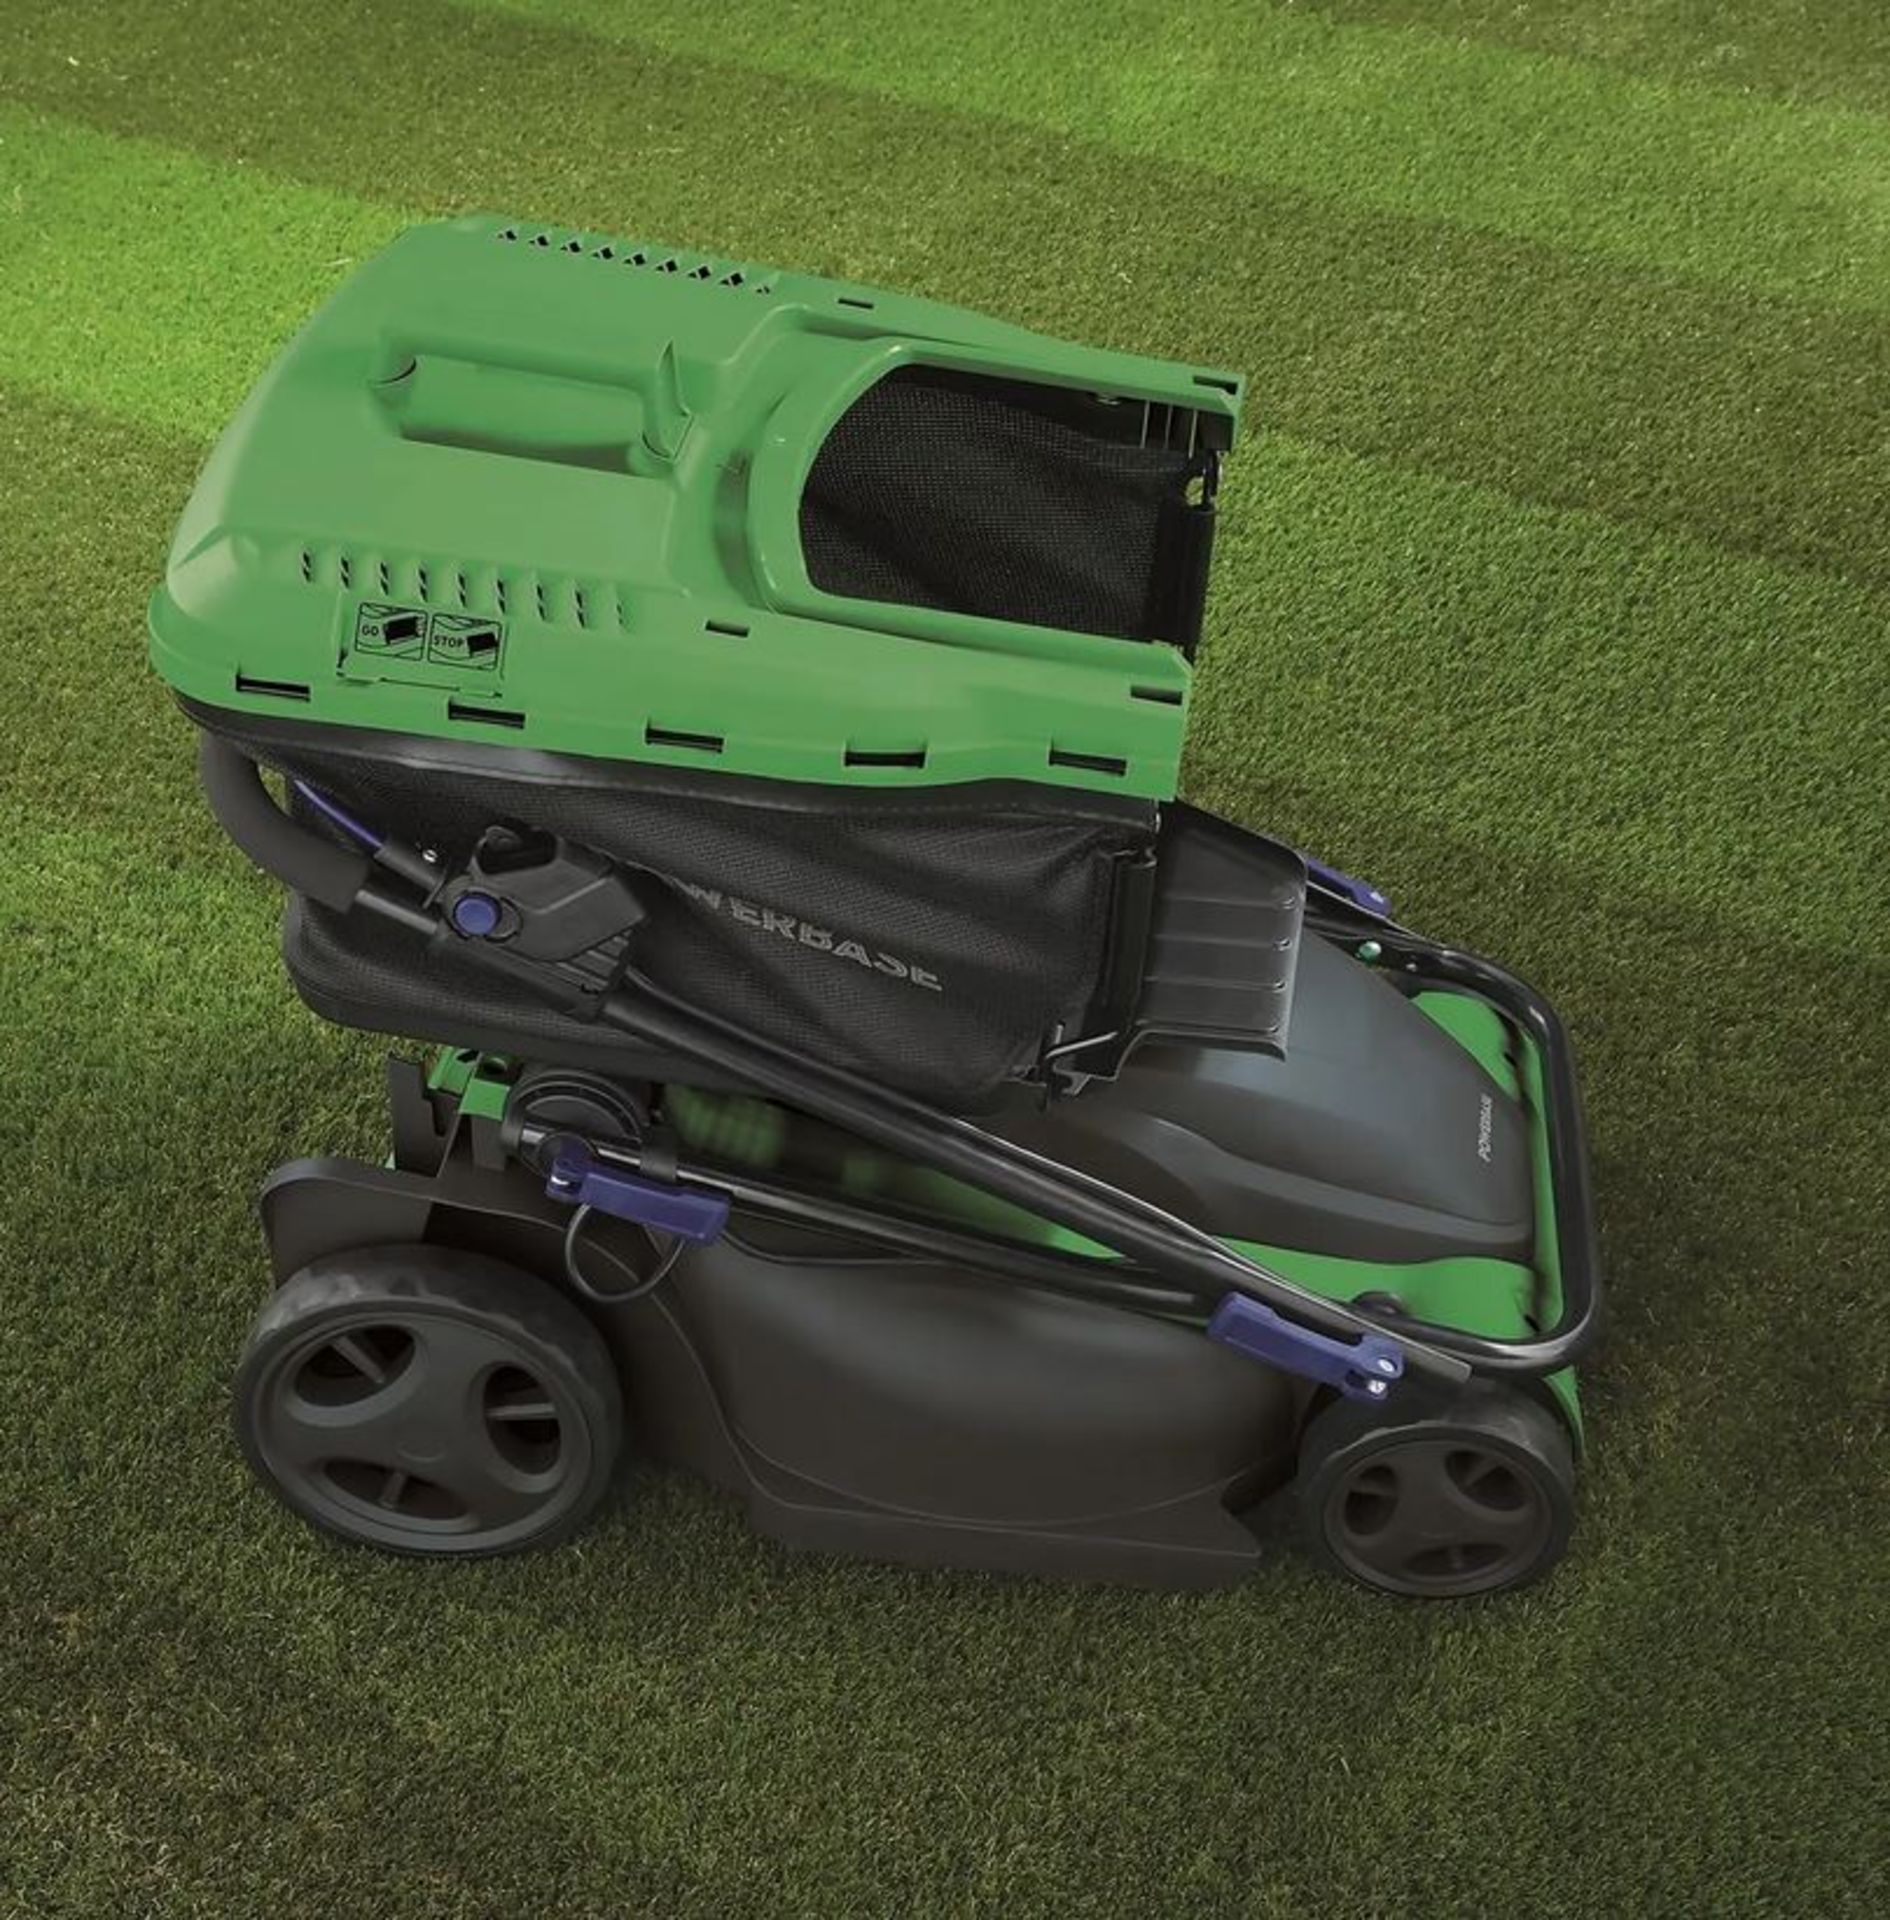 (R13C) 1x Powerbase 41cm 1800W Electric Rotary Lawn Mower RRP £119. - Image 3 of 4